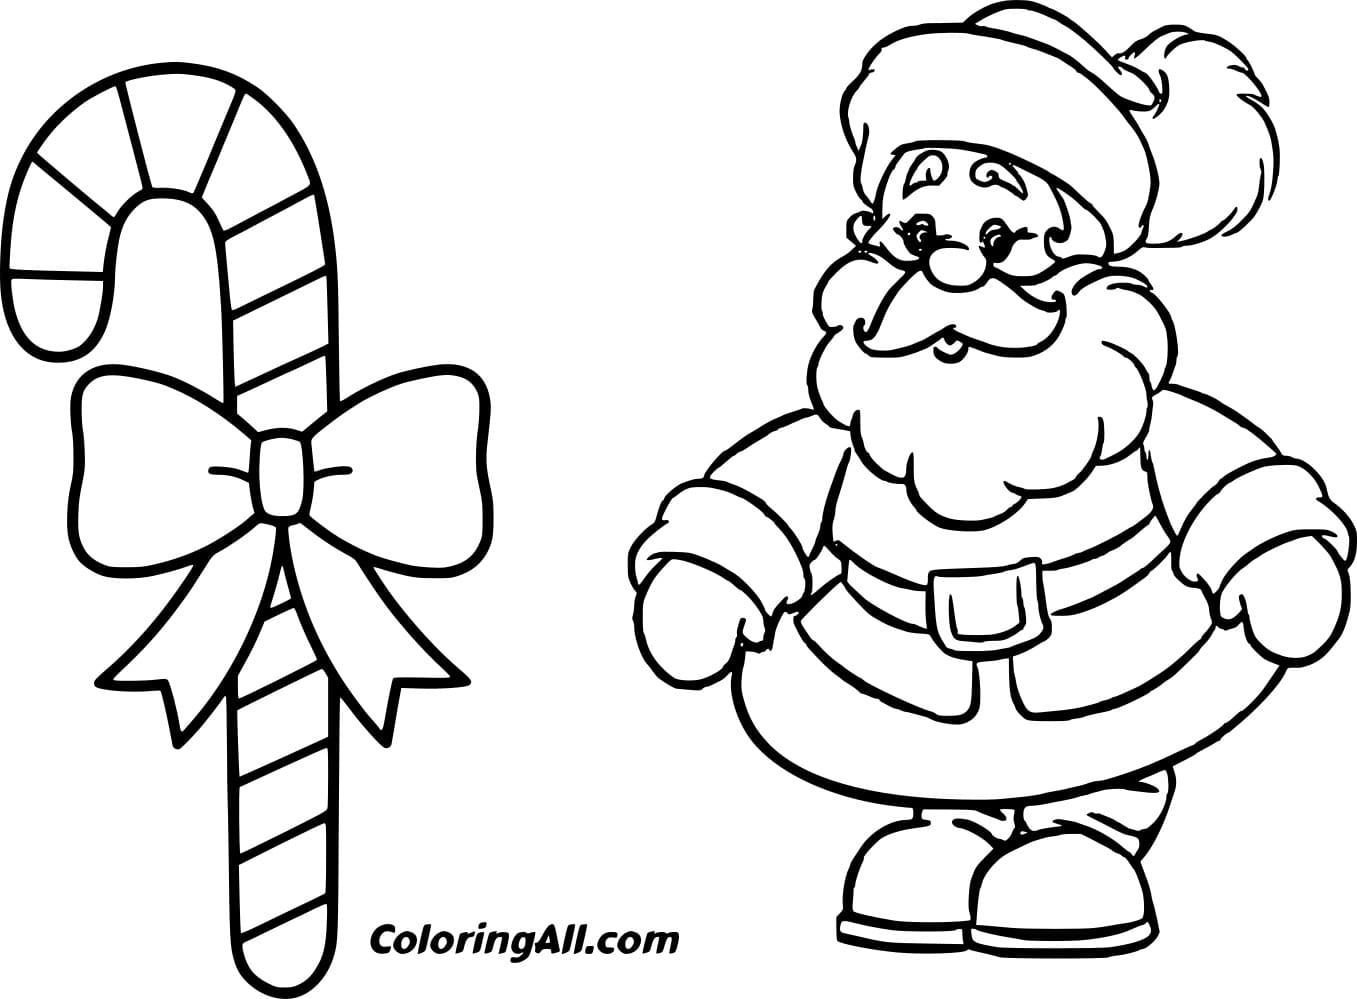 Candy Cane and Santa Drawing Coloring Page